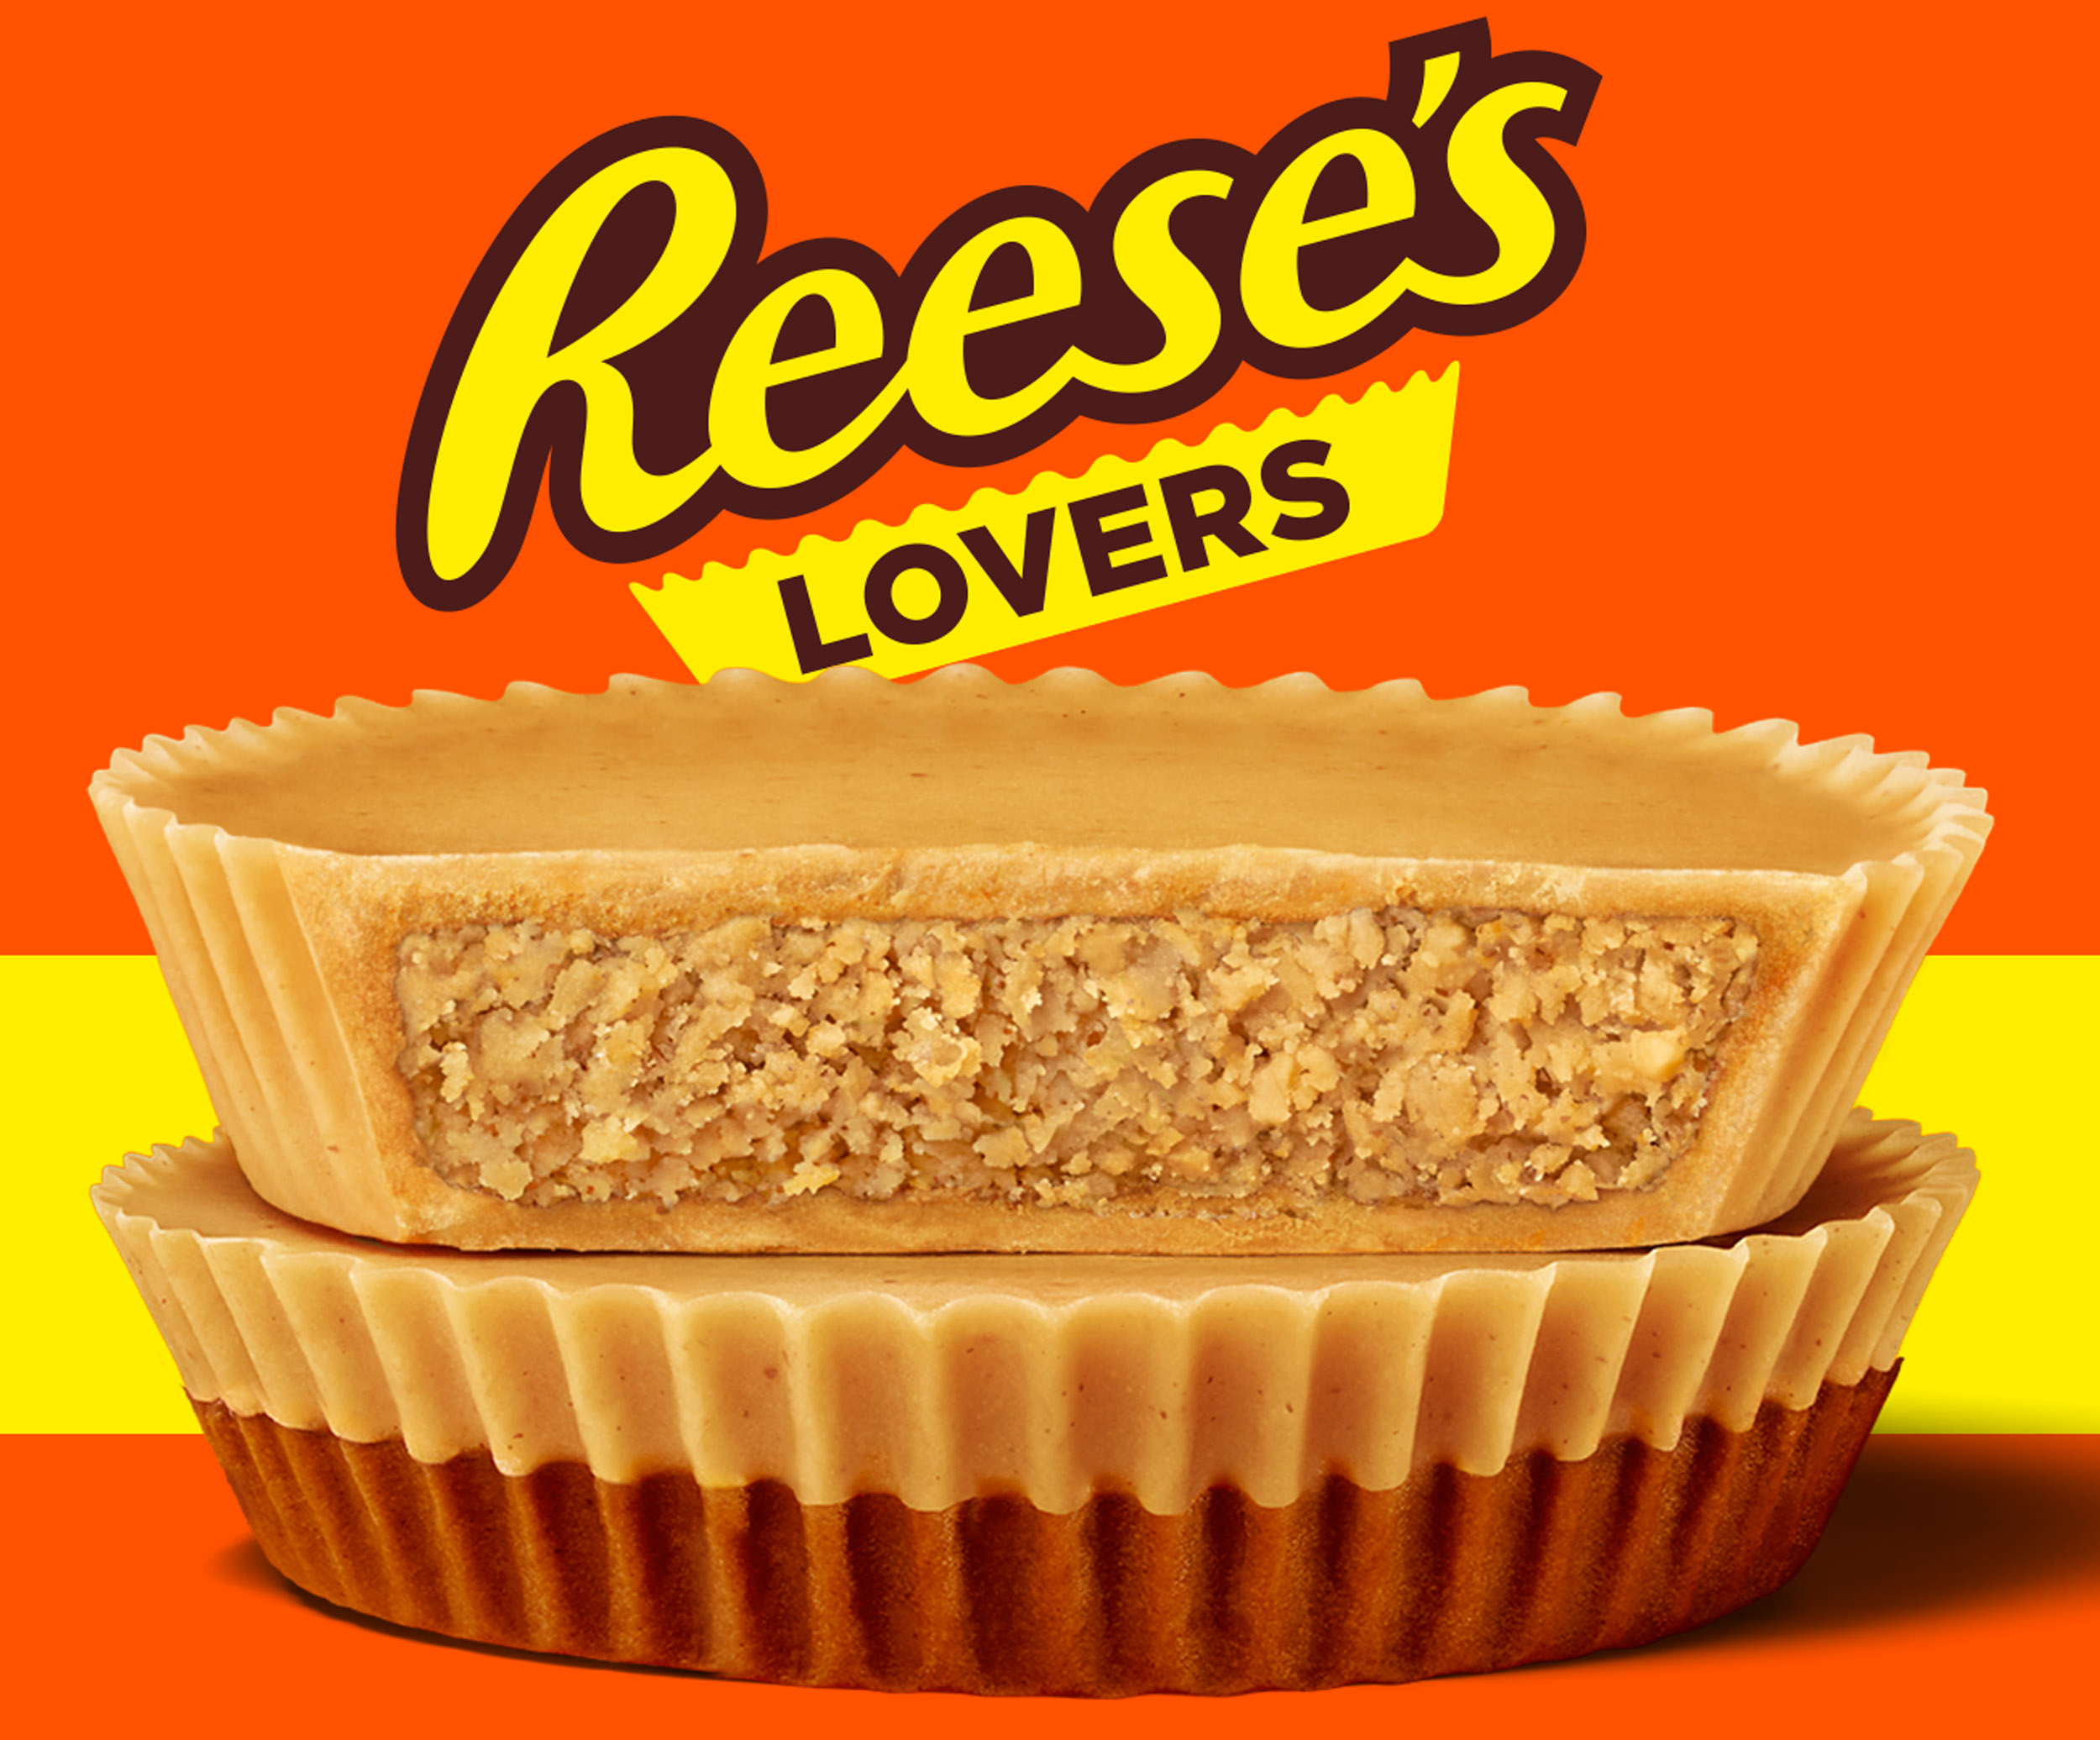 Reese's Lovers